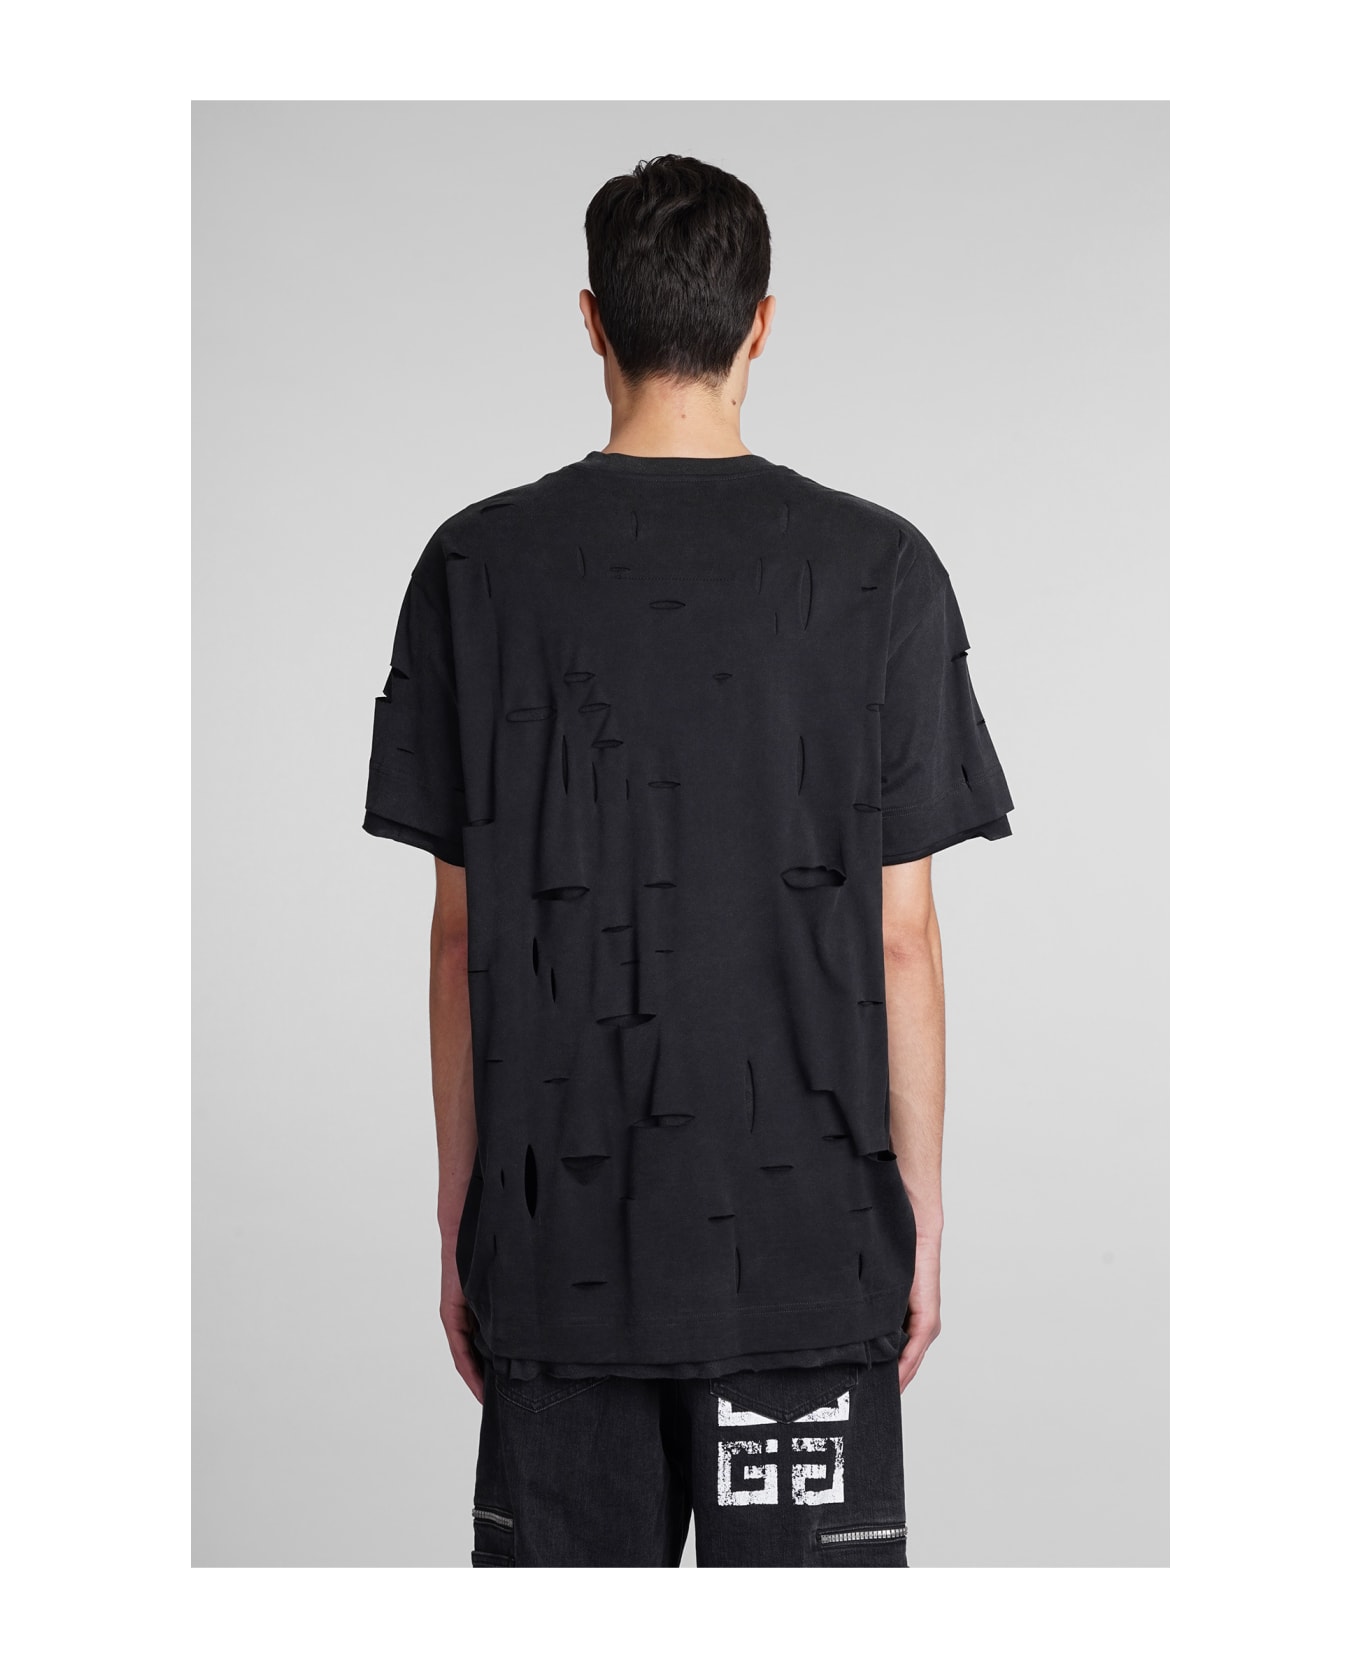 Givenchy Destroyed Effect T-shirt - FADED BLACK シャツ